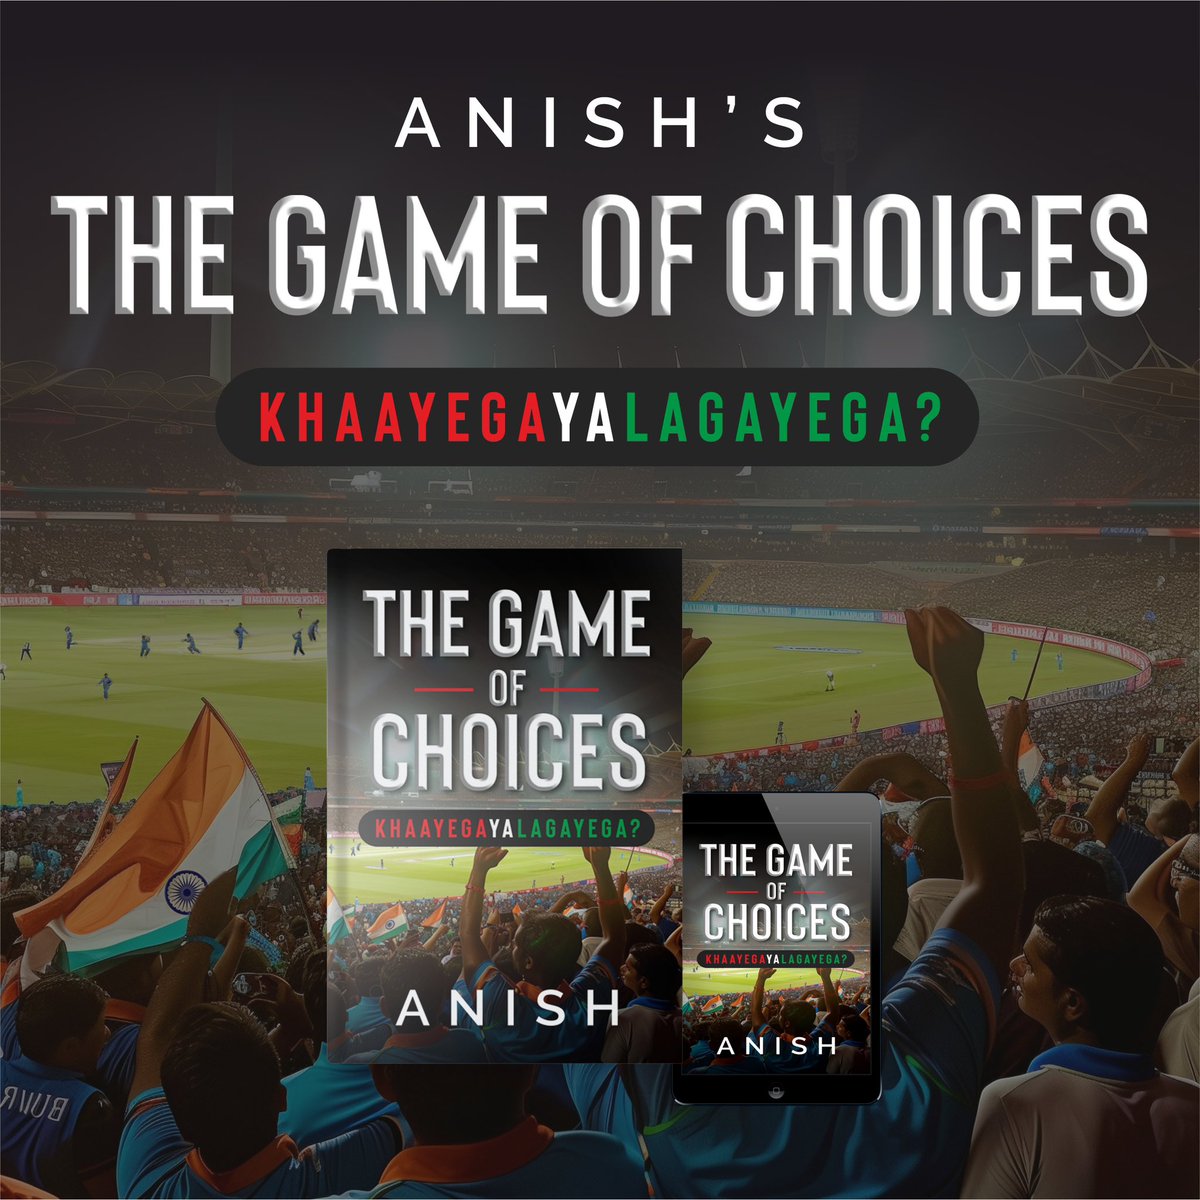 Presenting cover of my first book : The Game Of Choices - Khaayega Ya Lagayega?

#ipl #cricketworldcup #cricketlover #cricketfans #cricketfever #fictionbook